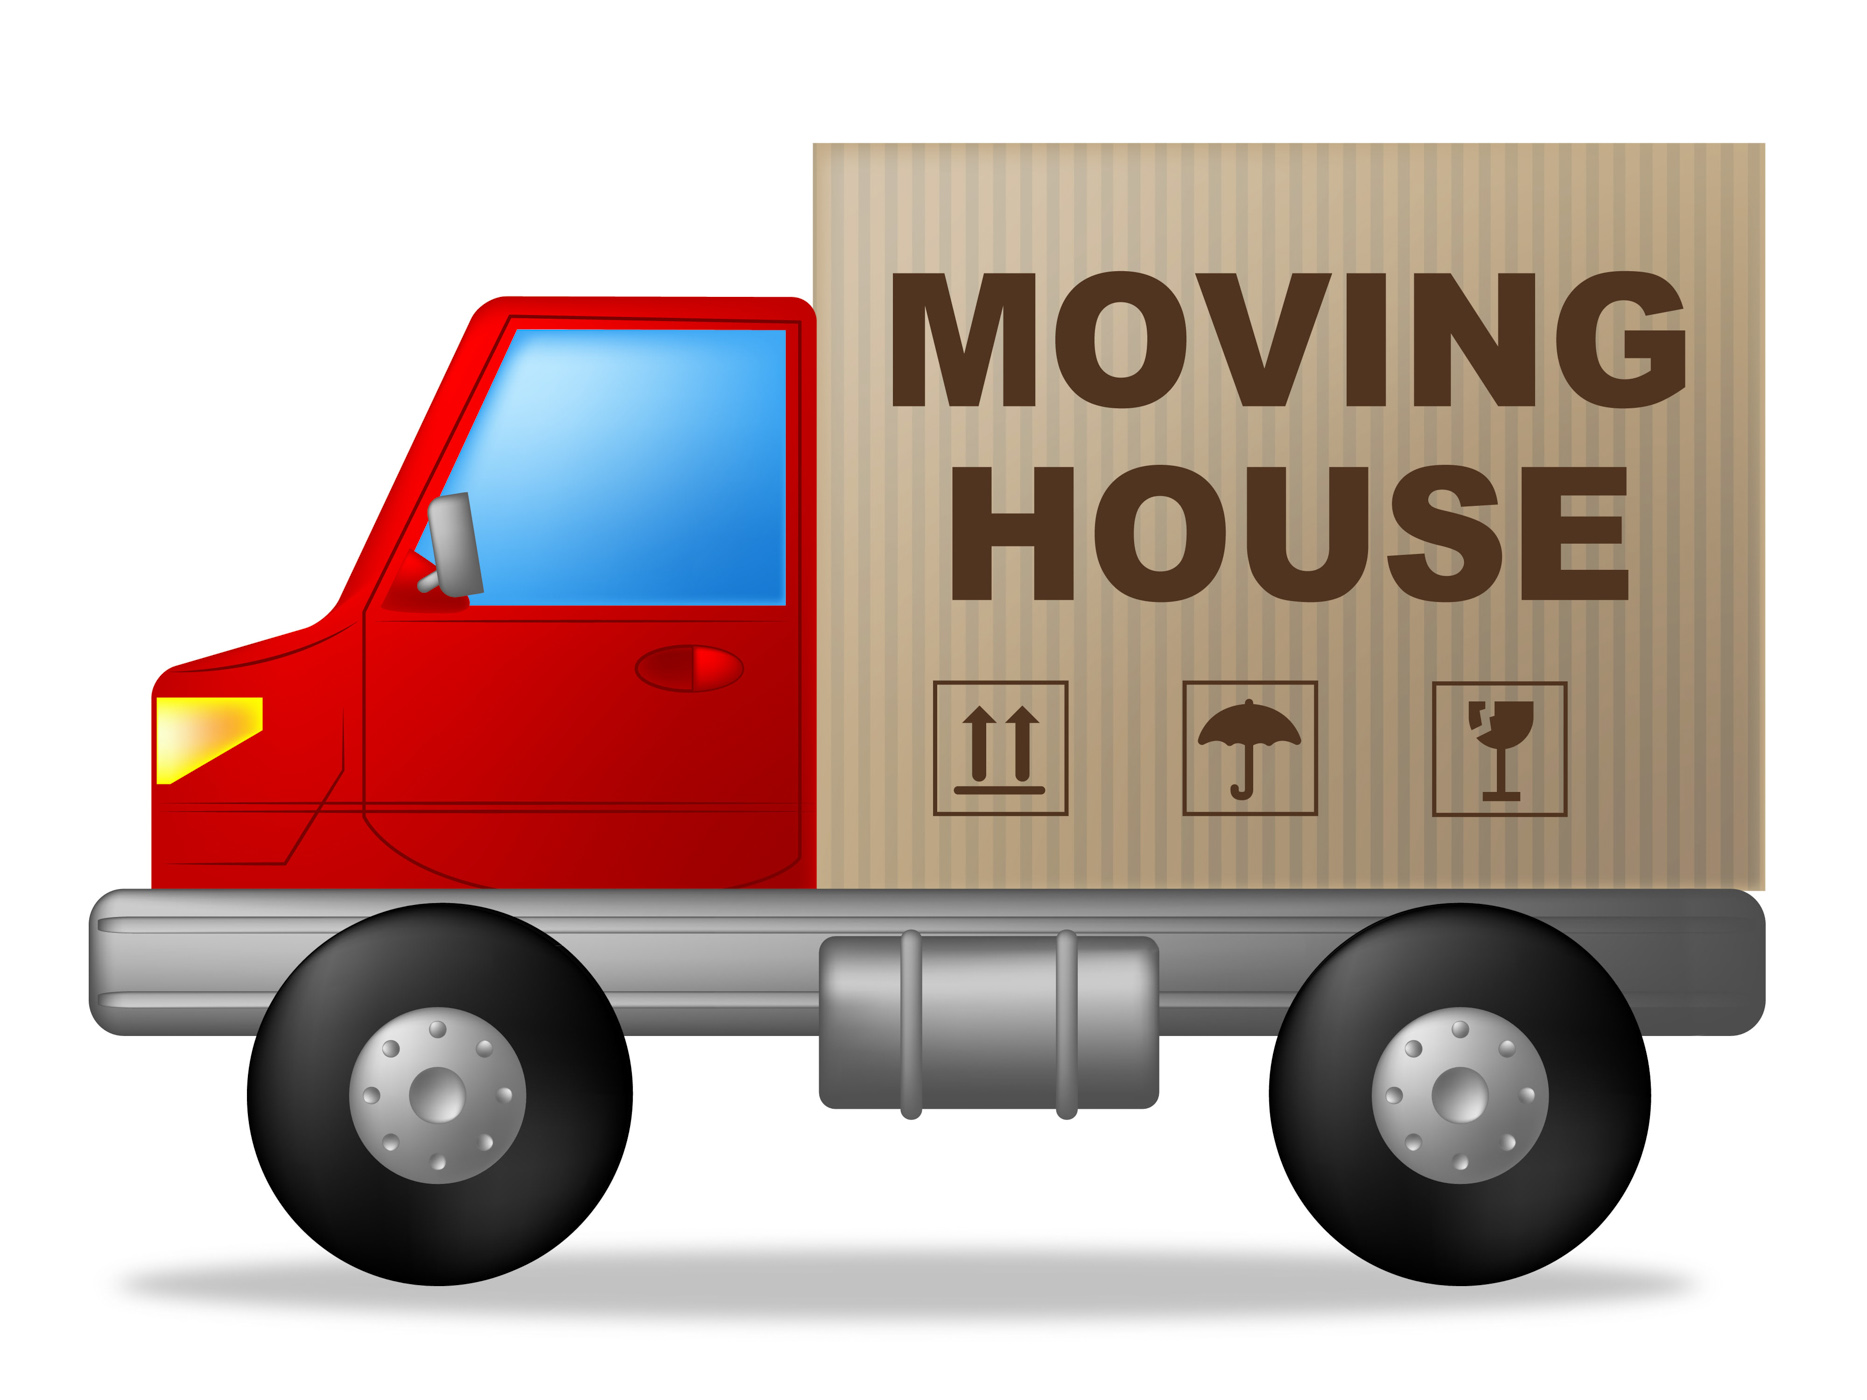 Moving house shows change of residence and lorry photo